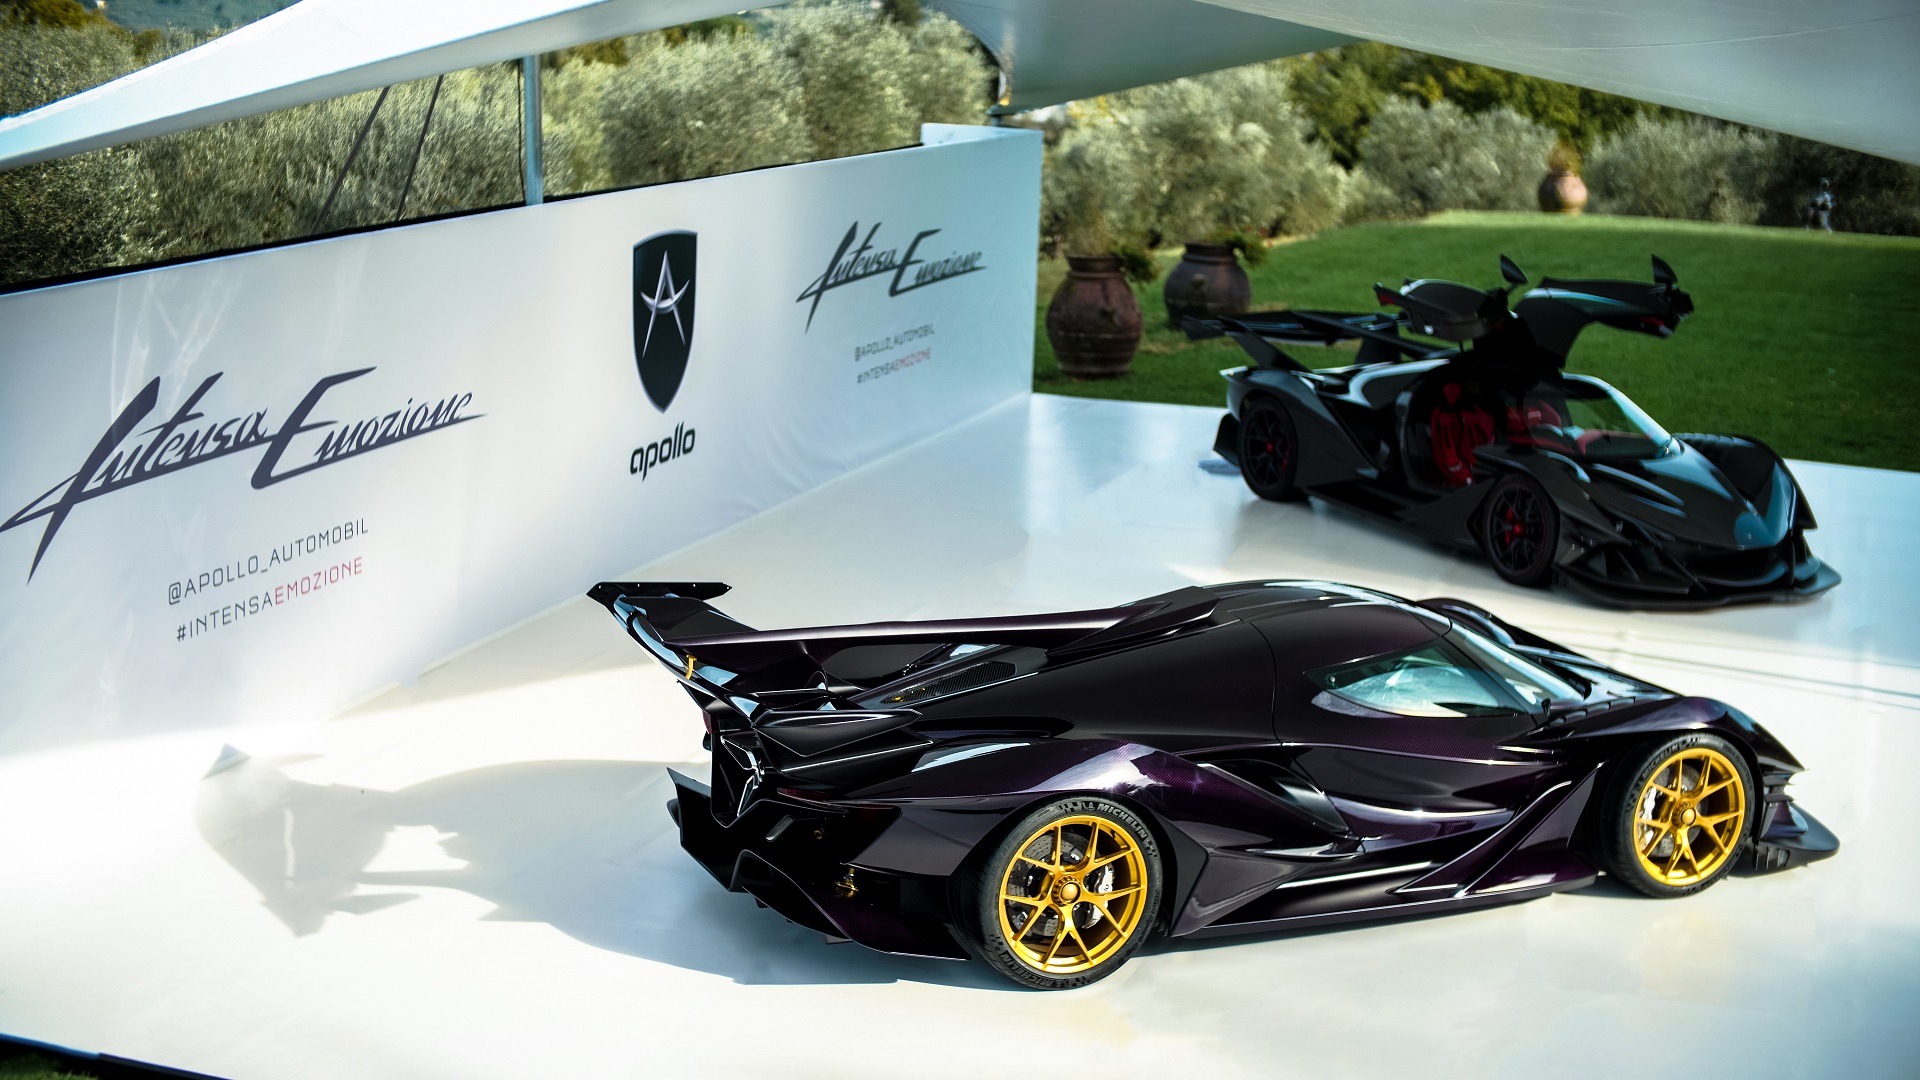 Image showing two Apollo Intensa Emozione hypercars at a car event